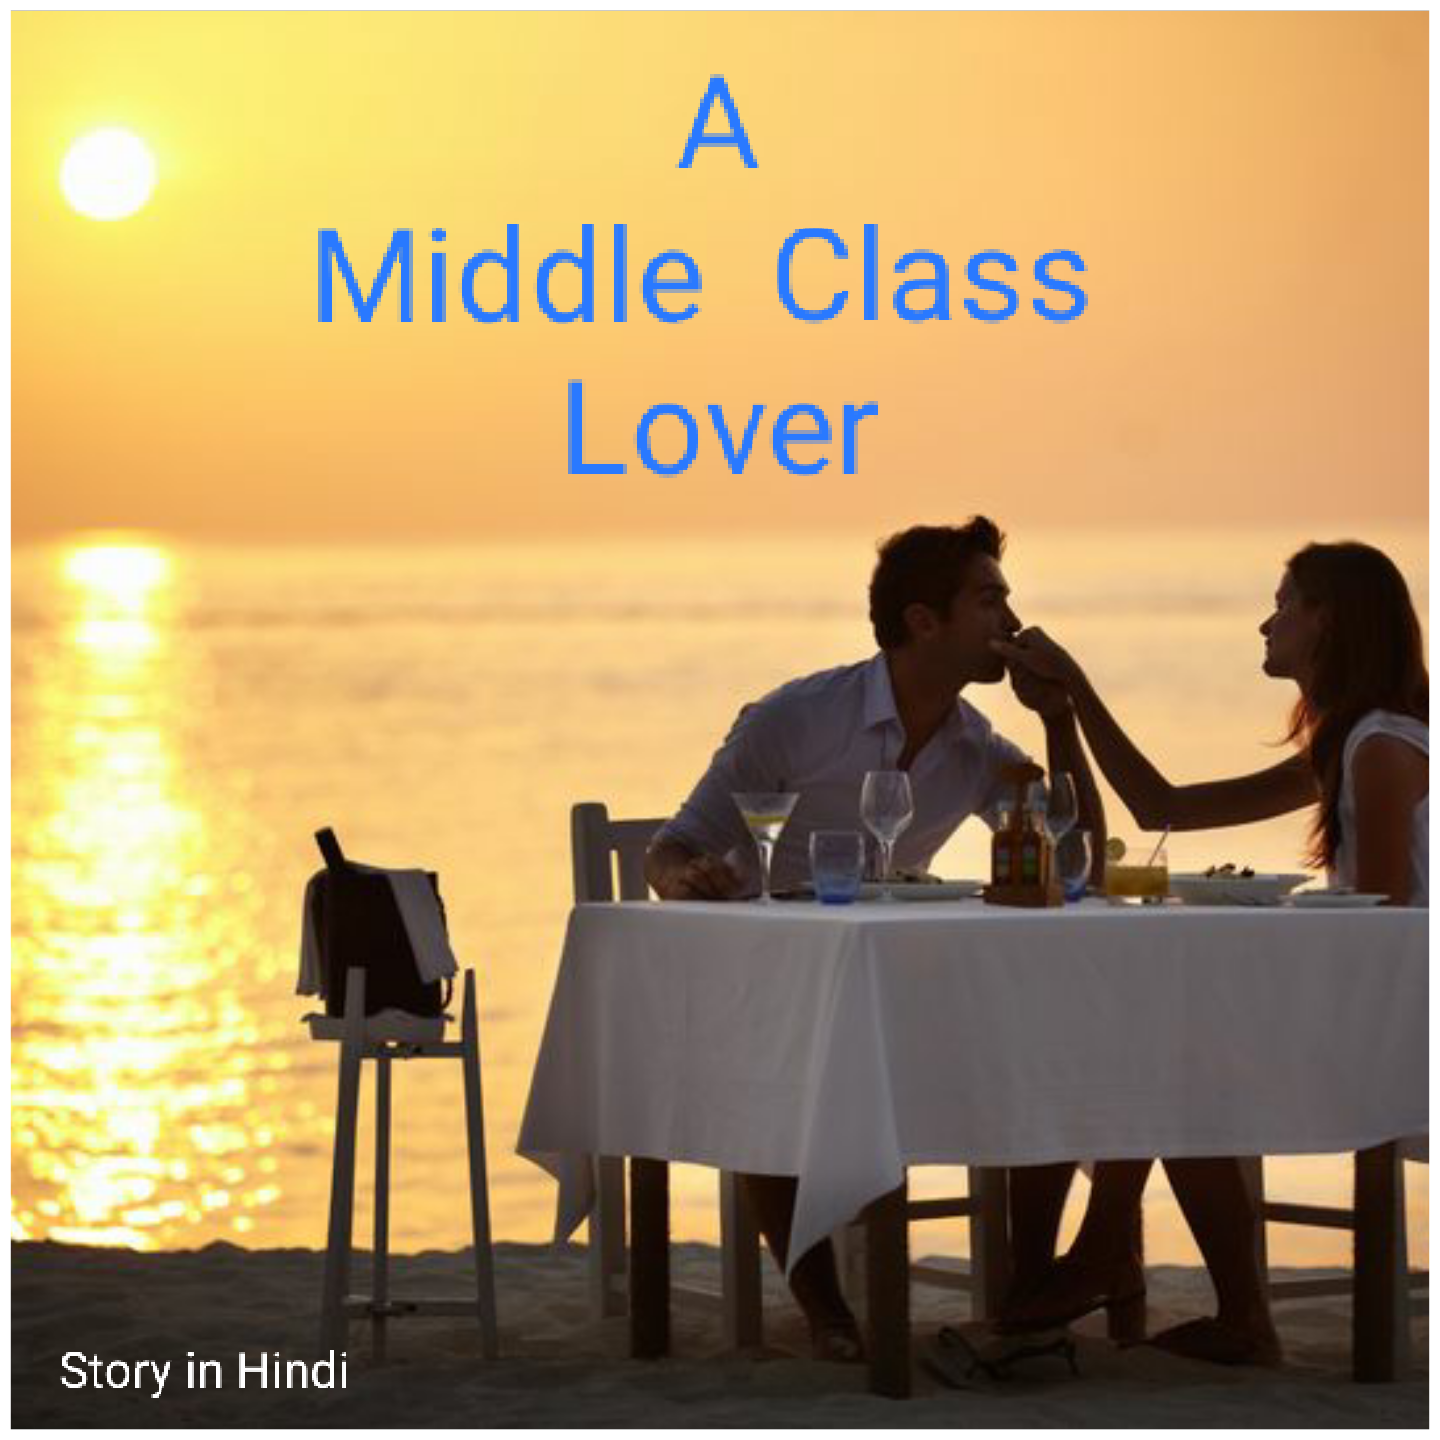 Middle Class Lover, Middle Class Family, Belong